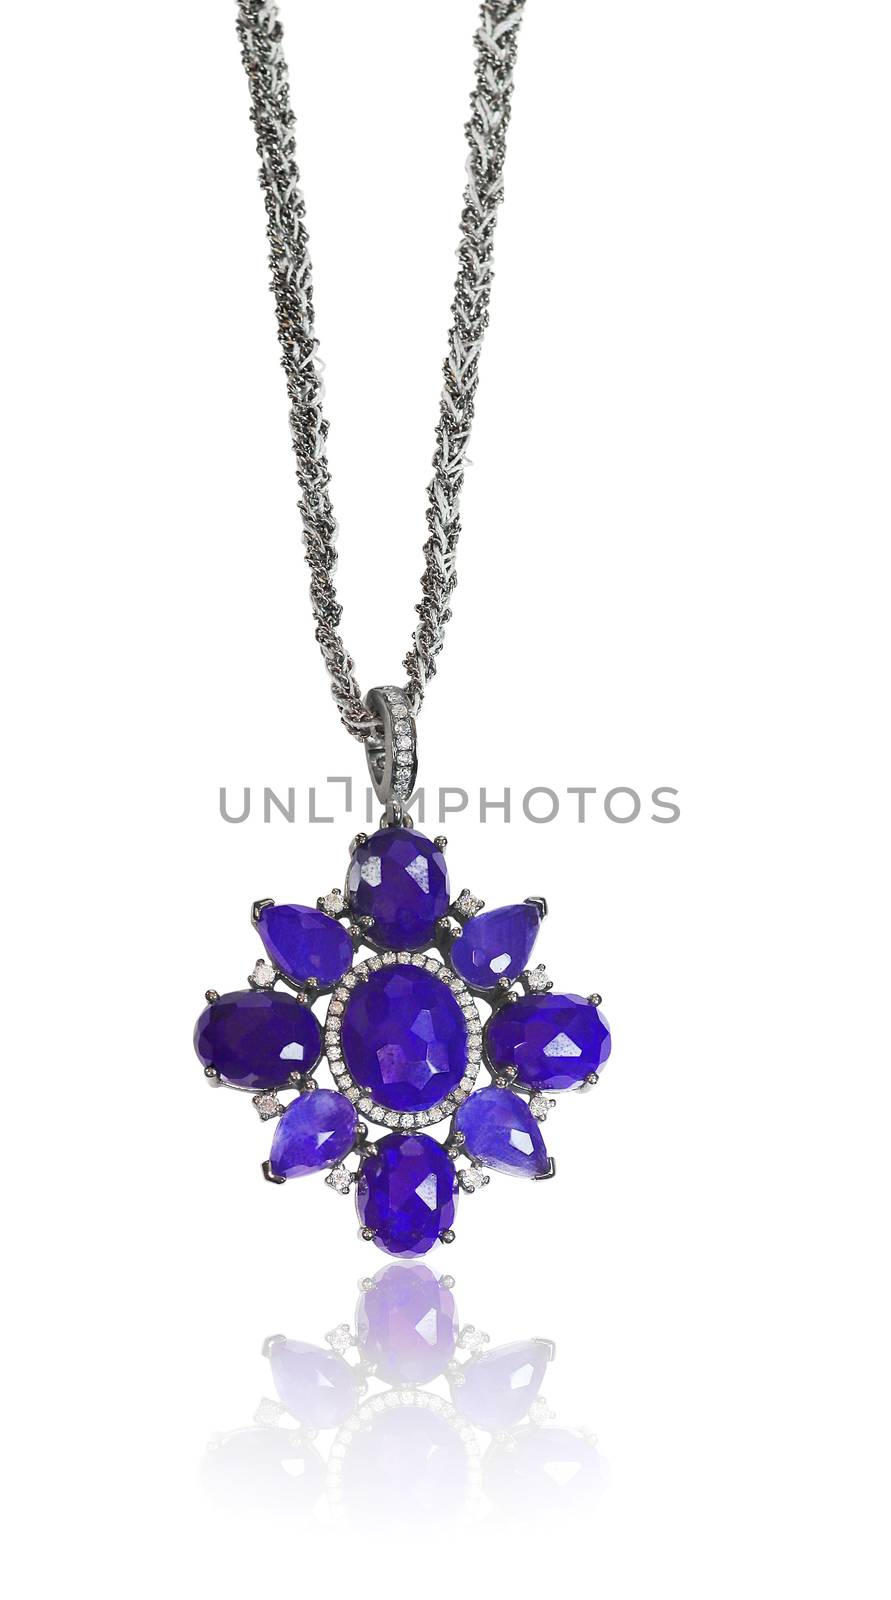 Blue Gemstone and Diamond Pendant Necklace isolated on a white background with a reflection